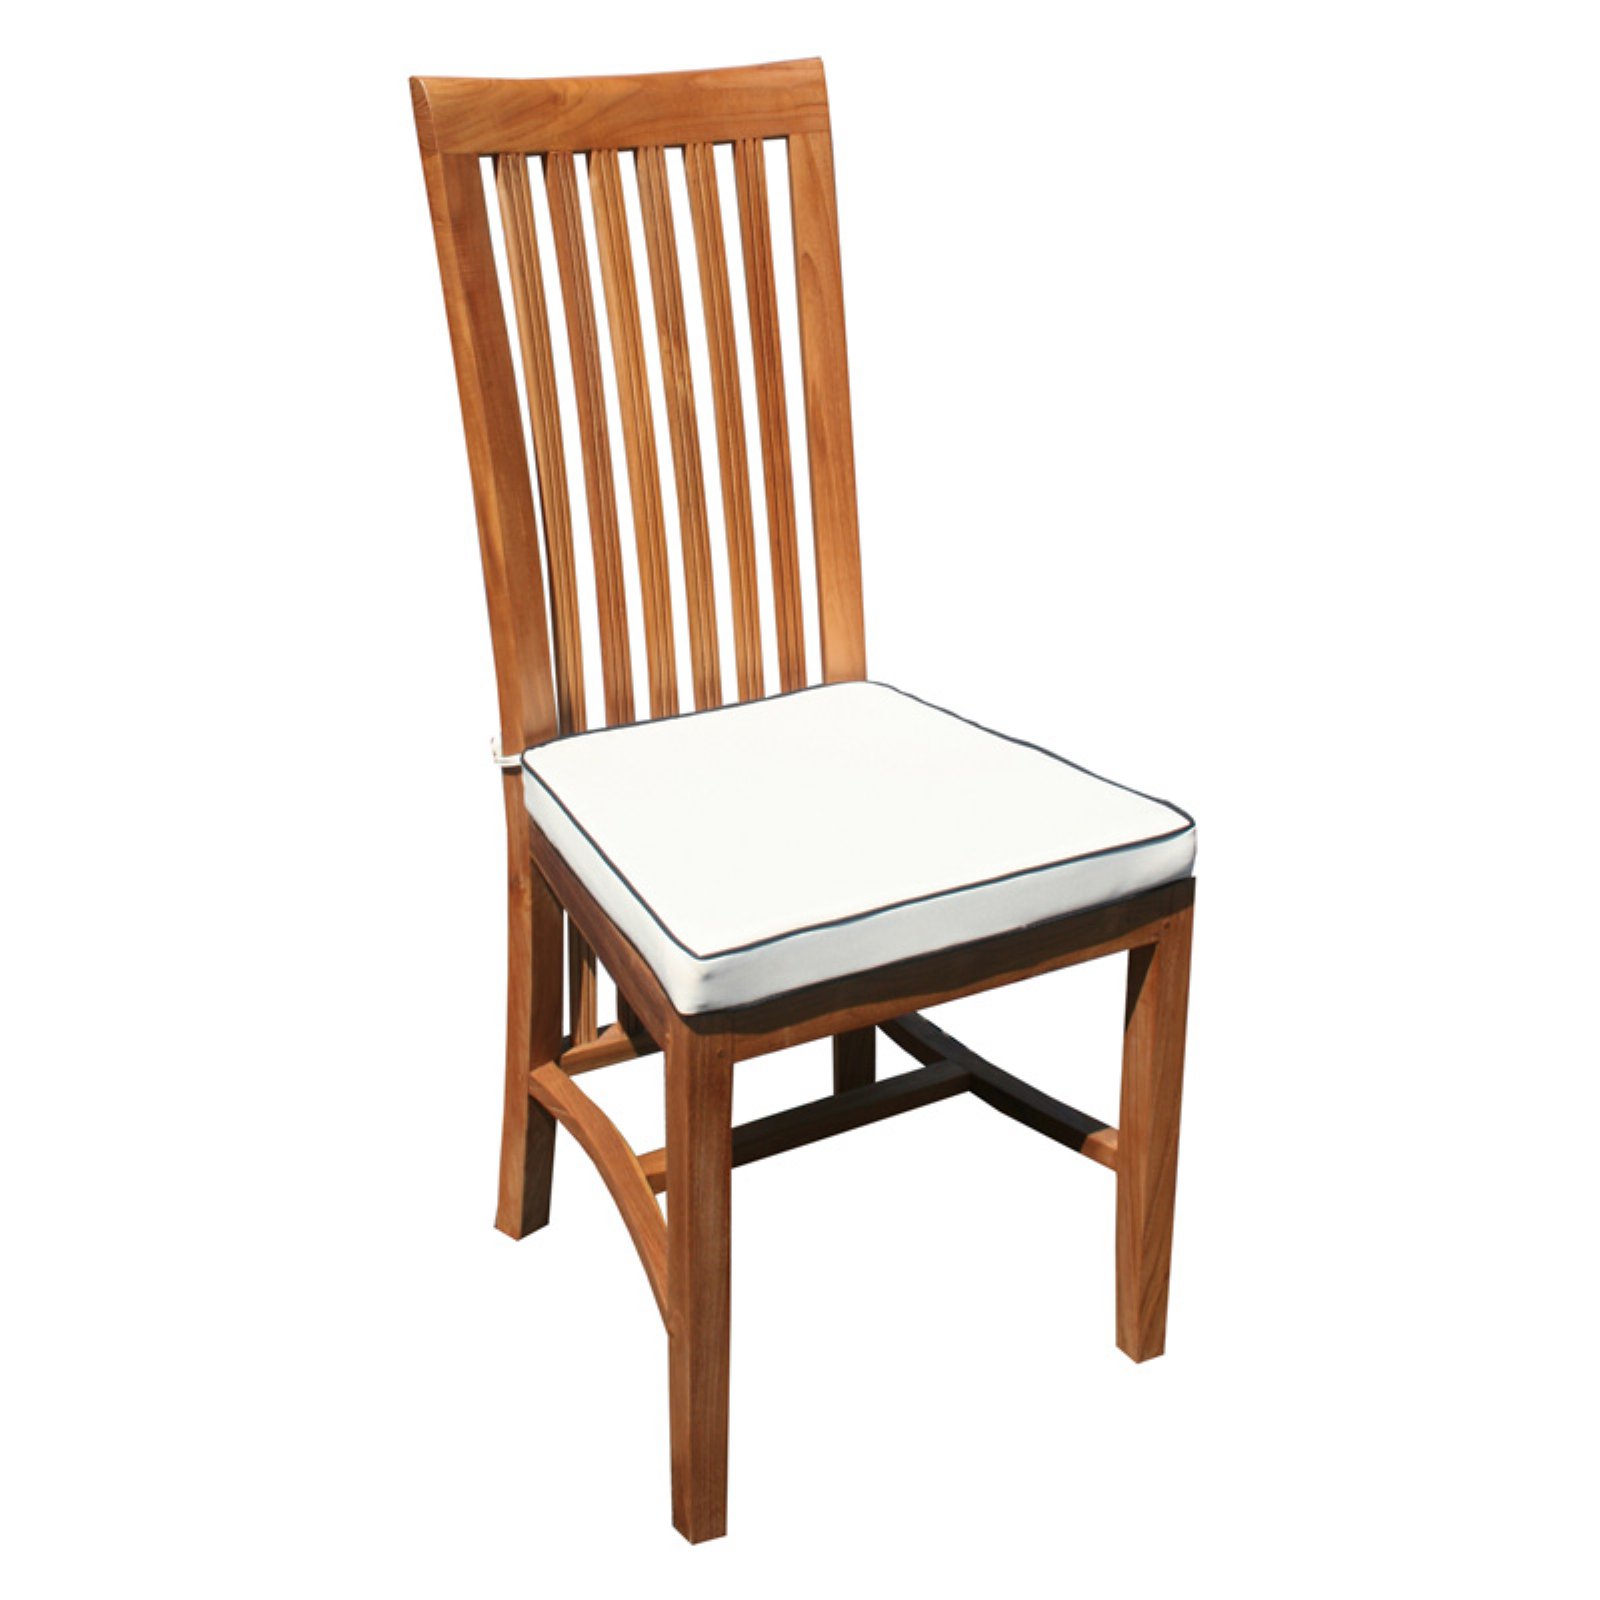 Chic Teak West Palm/Balero Outdoor Side Chair Cushion - image 1 of 4